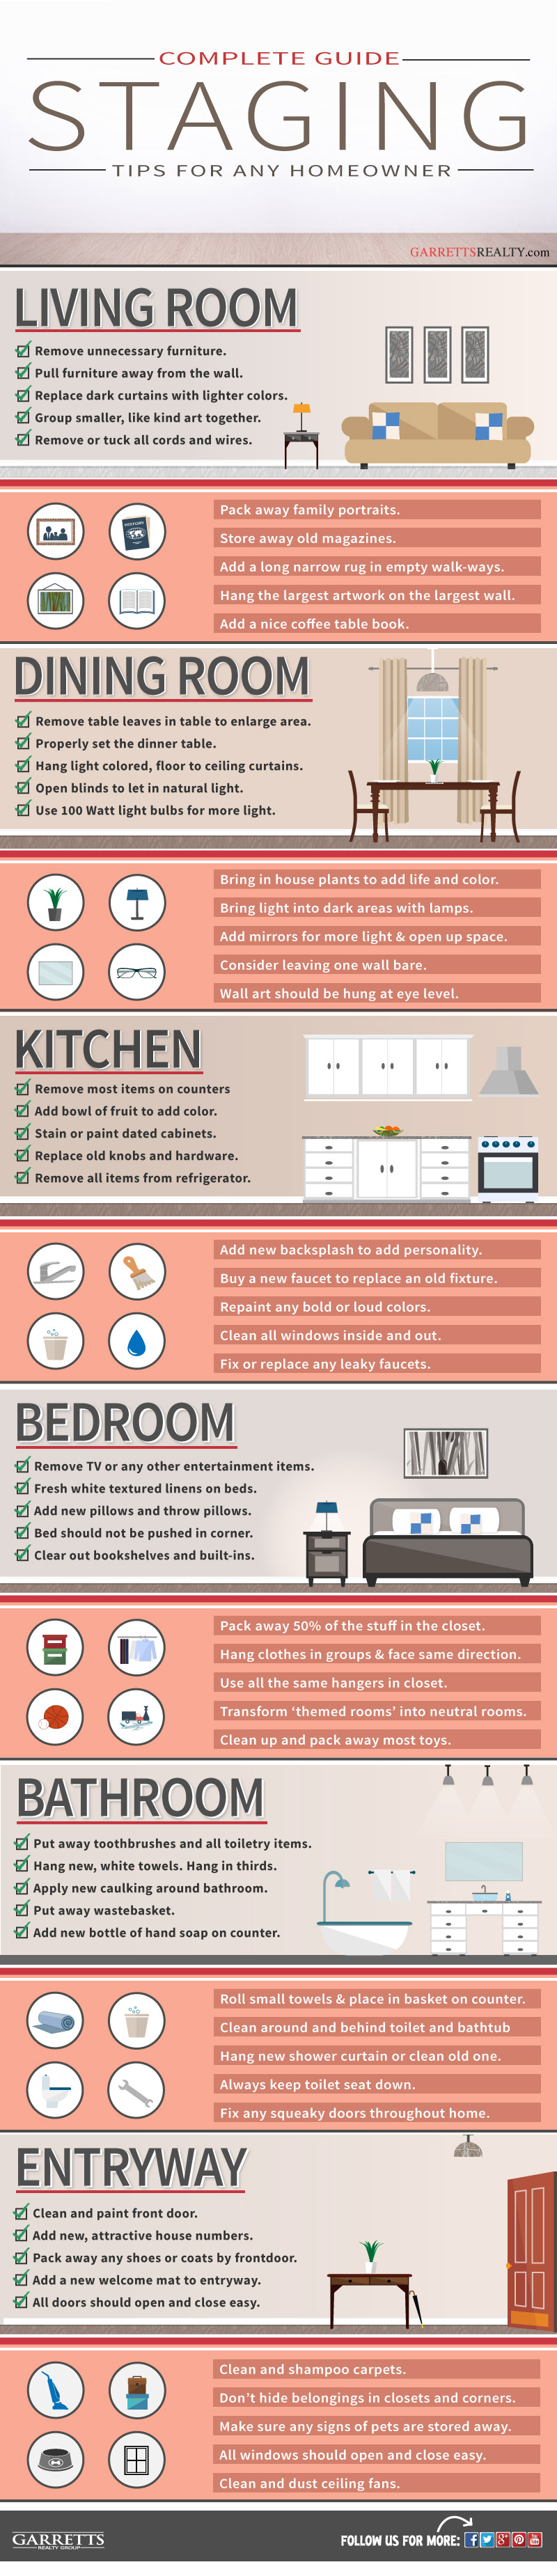 60 different tips to follow when staging a home for sale - Infographic.